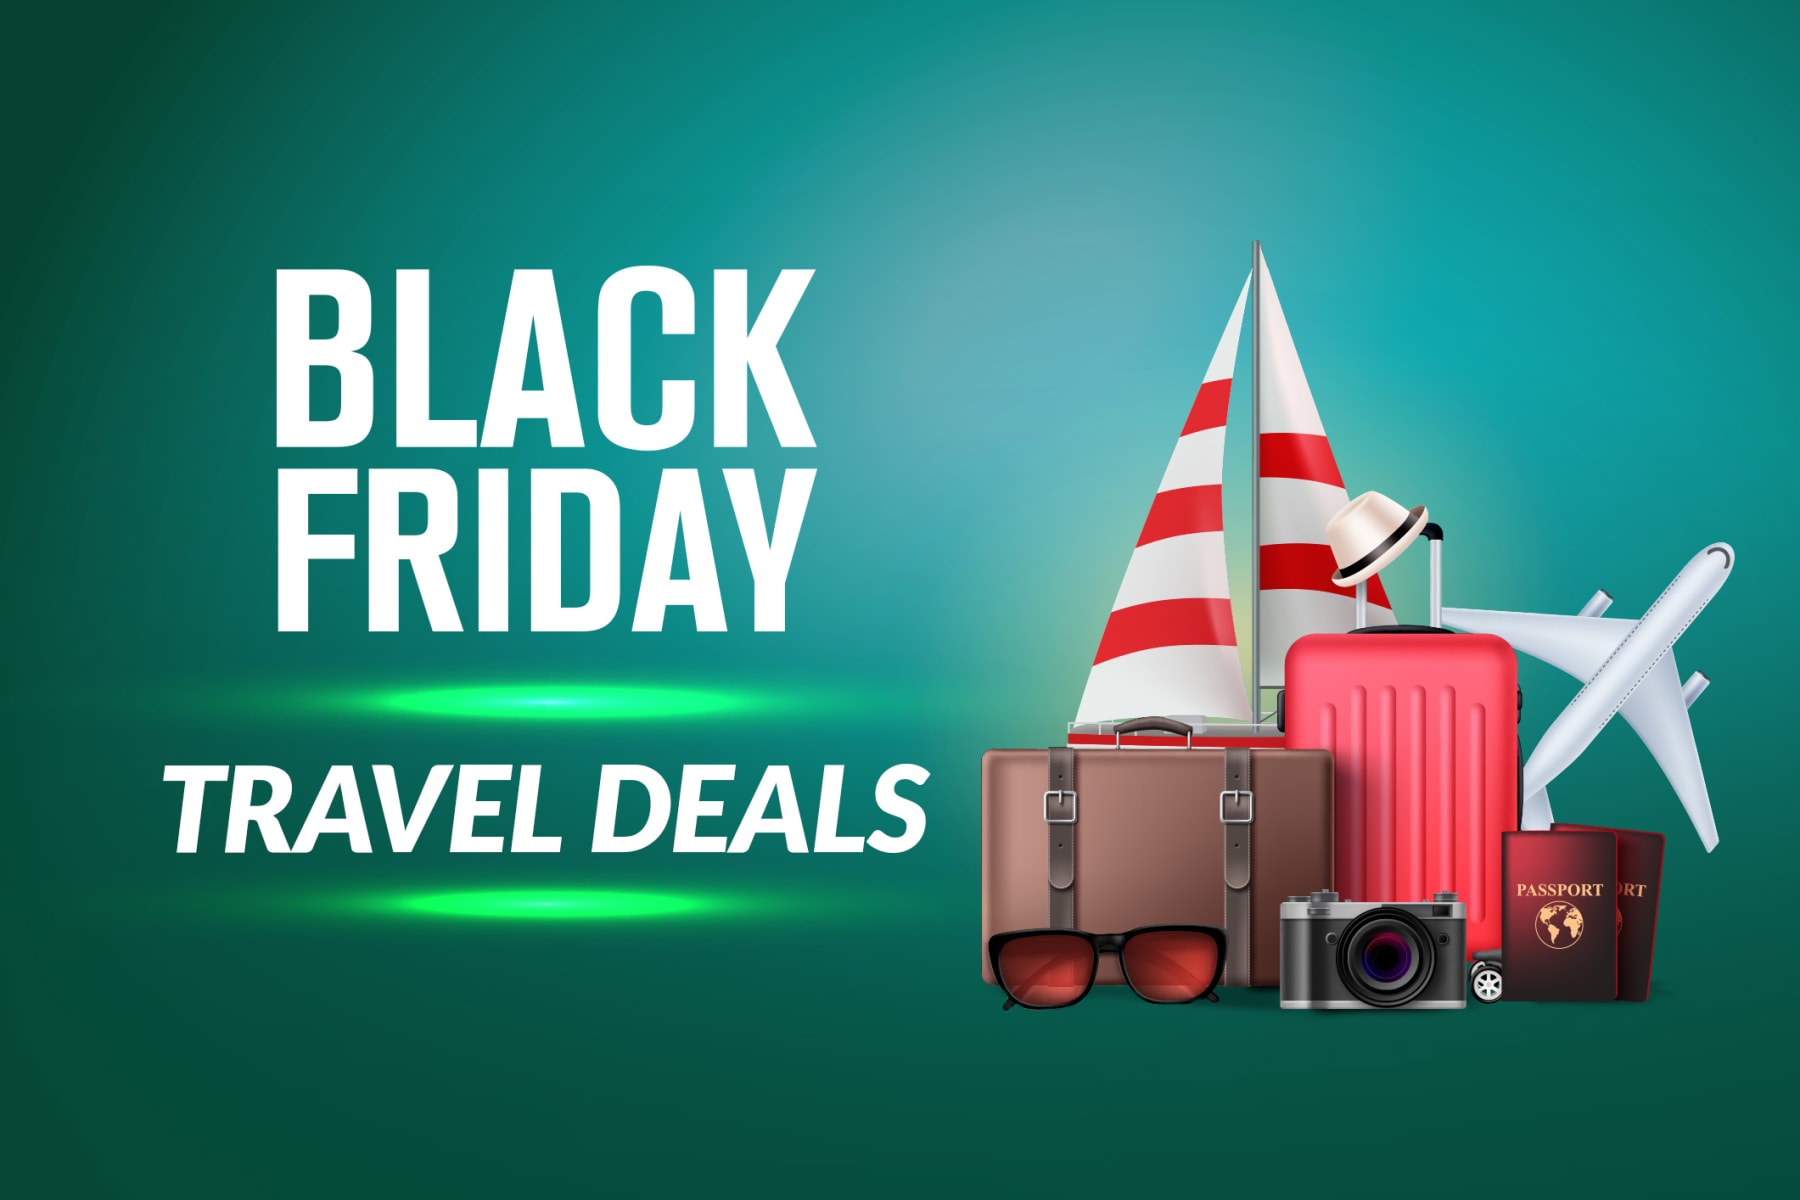 Travel items sit next to text that reads Black Friday Travel Deals.